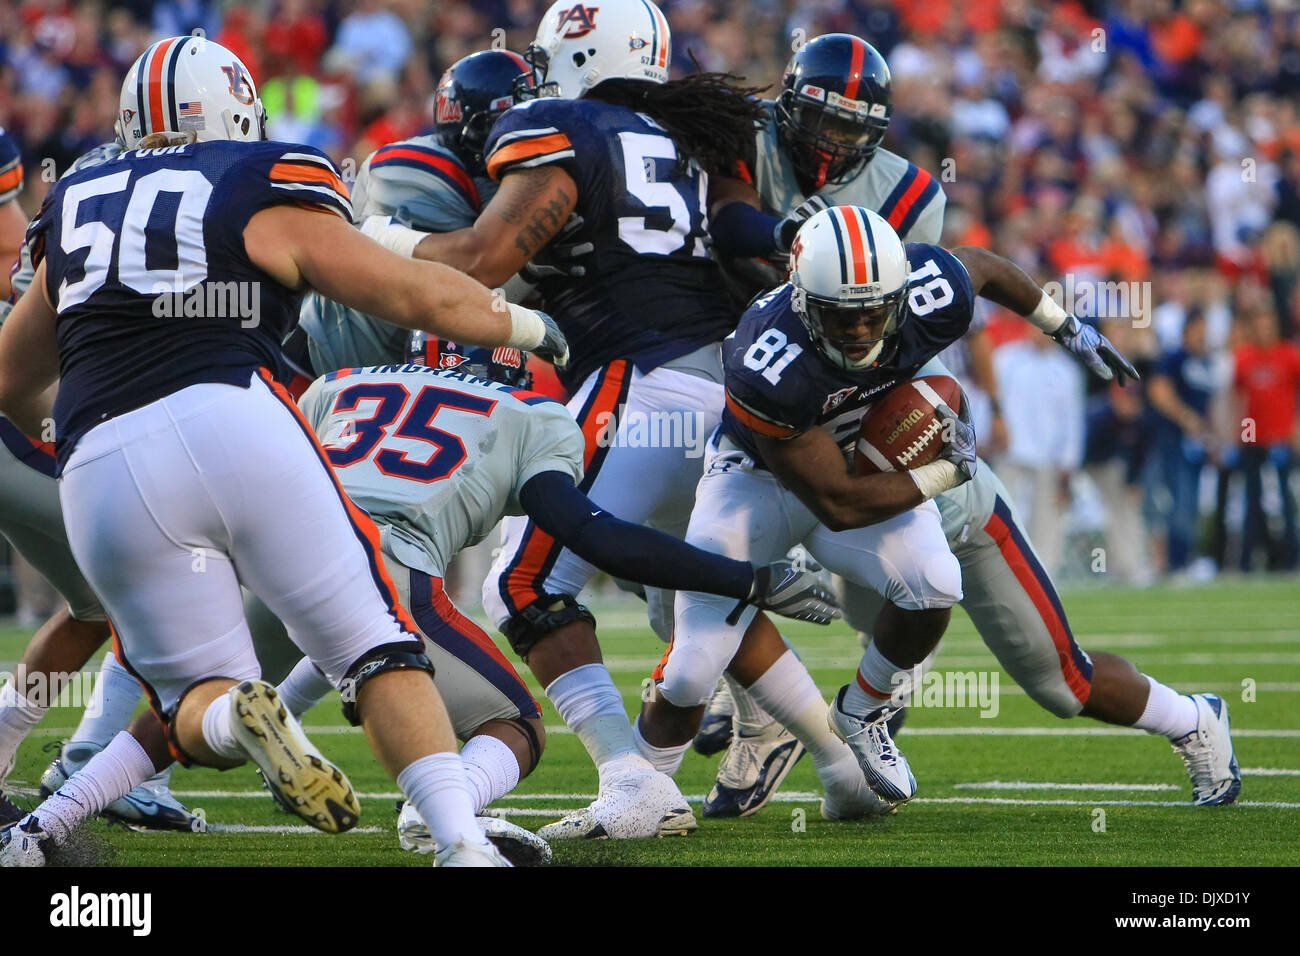 Oct. 31, 2010 - Oxford, Mississippi, United States of America - Auburn WR Terrell Zachery (81) makes a move on Ole Miss CB Fon Ingram (35) during Auburn's 51-31victory over Ole Miss in Oxford, MS. (Credit Image: © Hays Collins/Southcreek Global/ZUMApress.com) Stock Photo